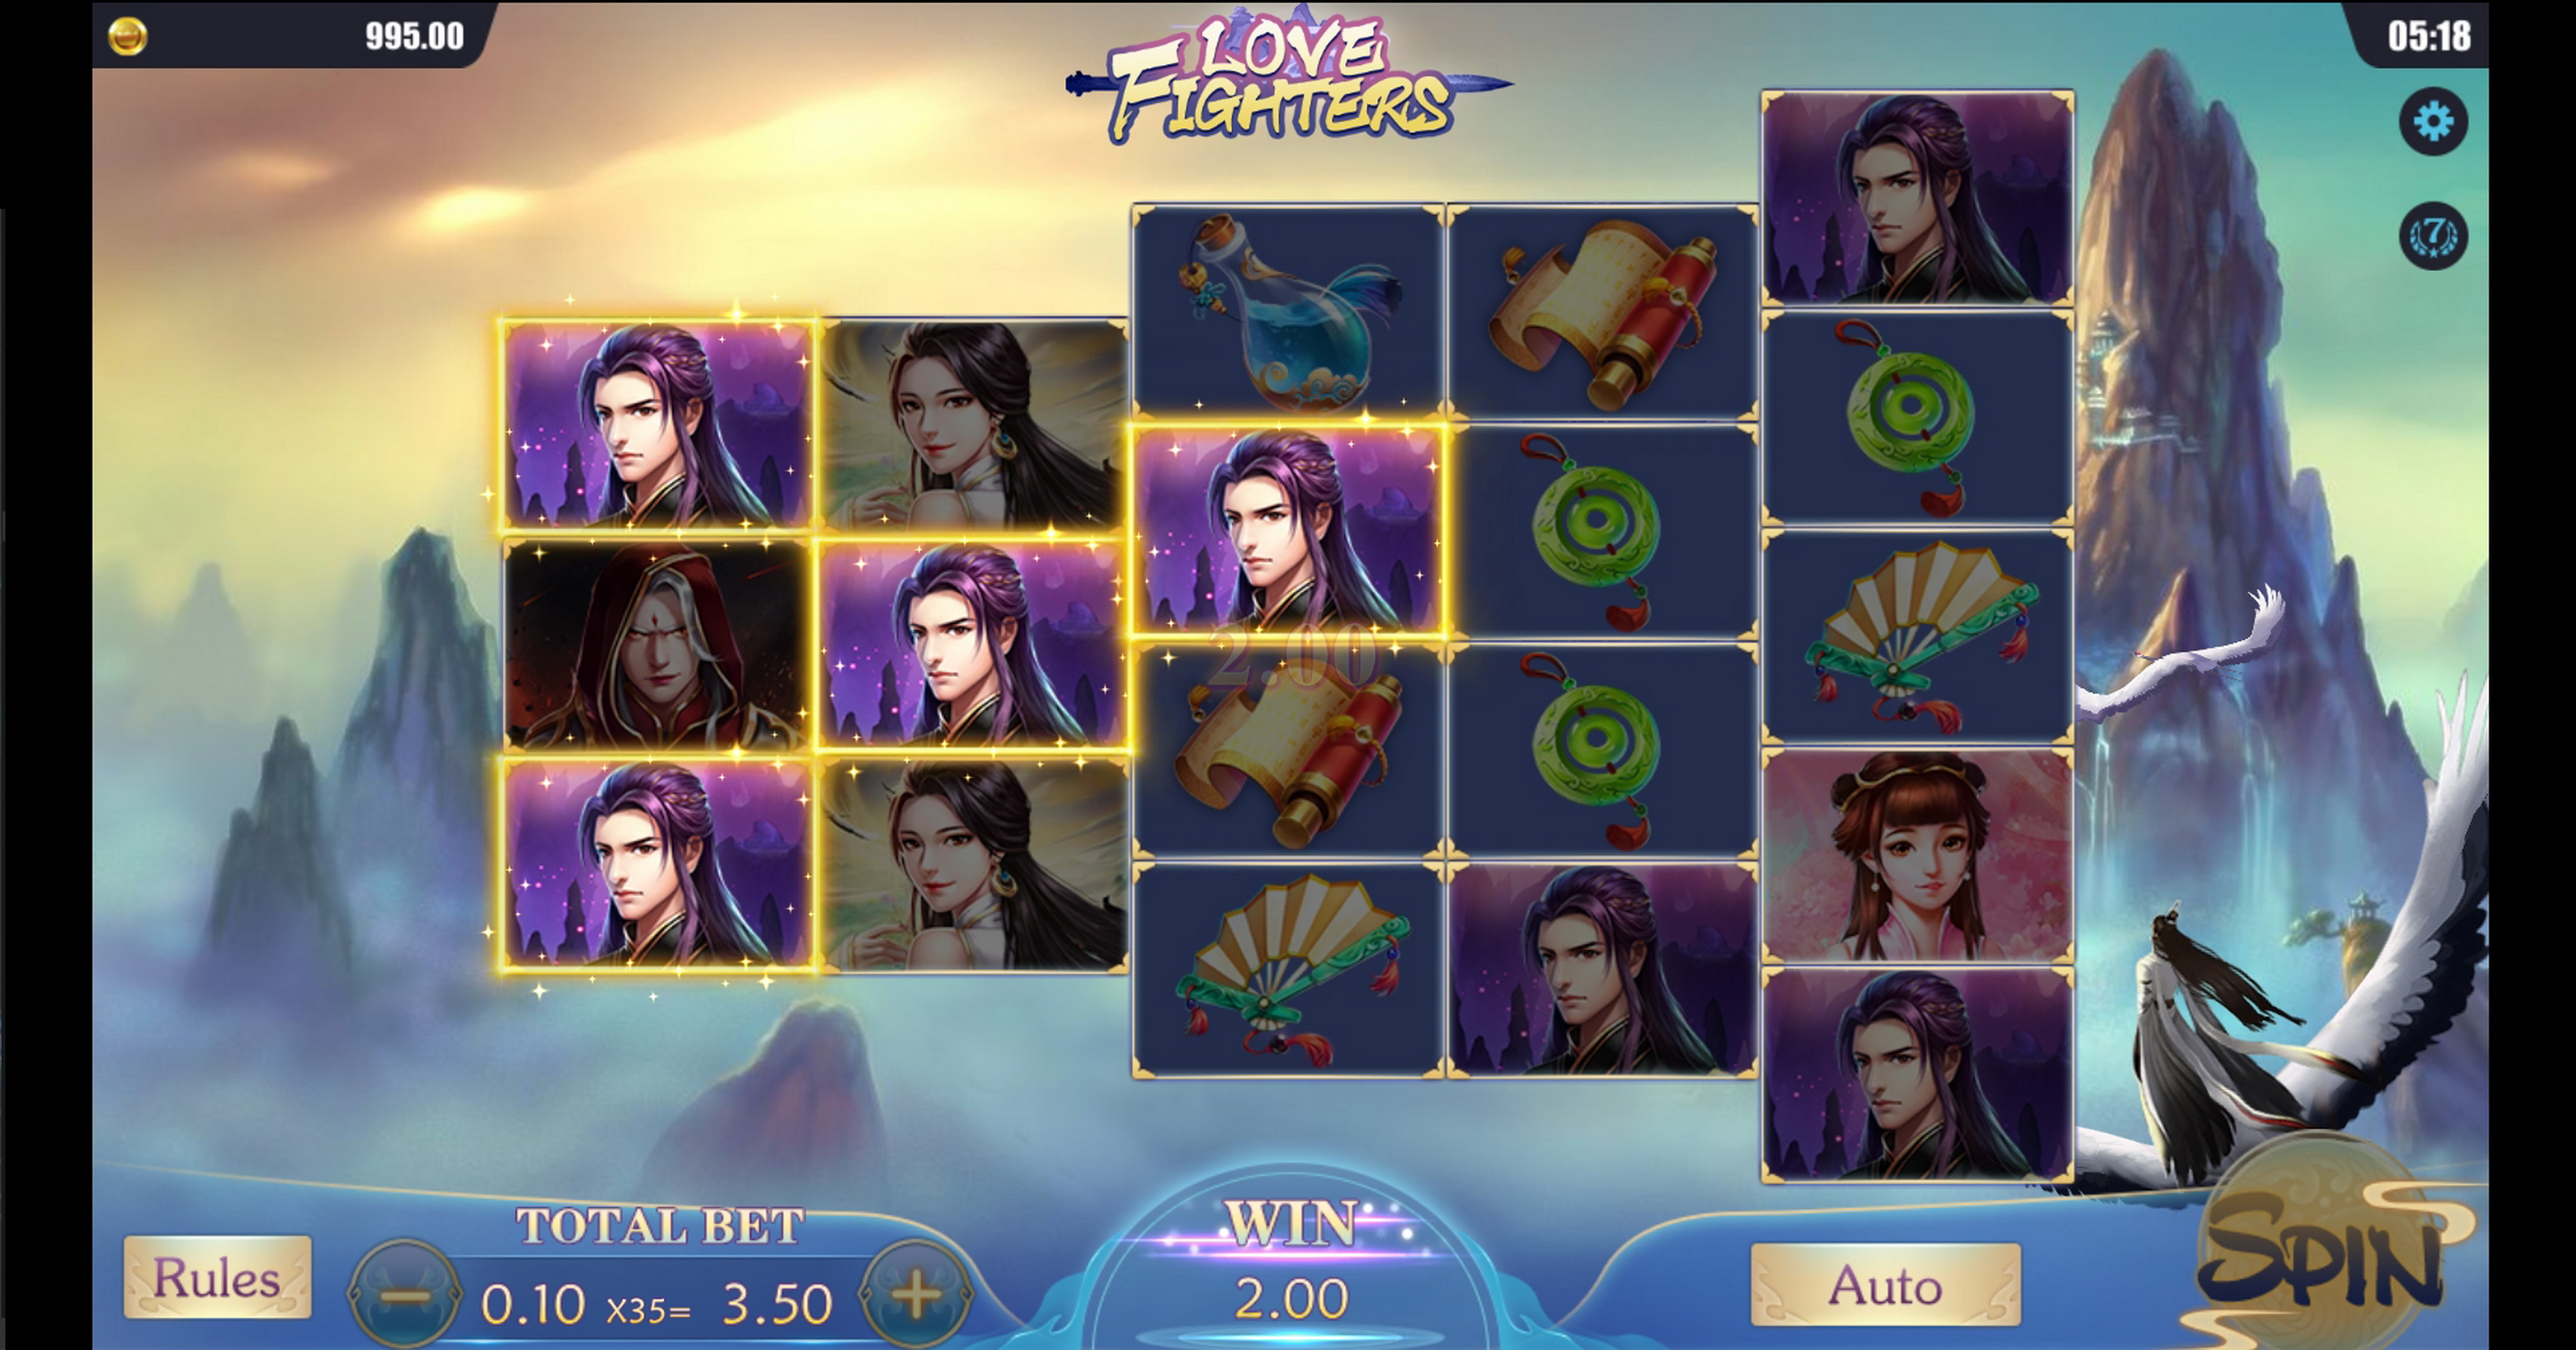 Win Money in Love Fighters Free Slot Game by Dreamtech Gaming